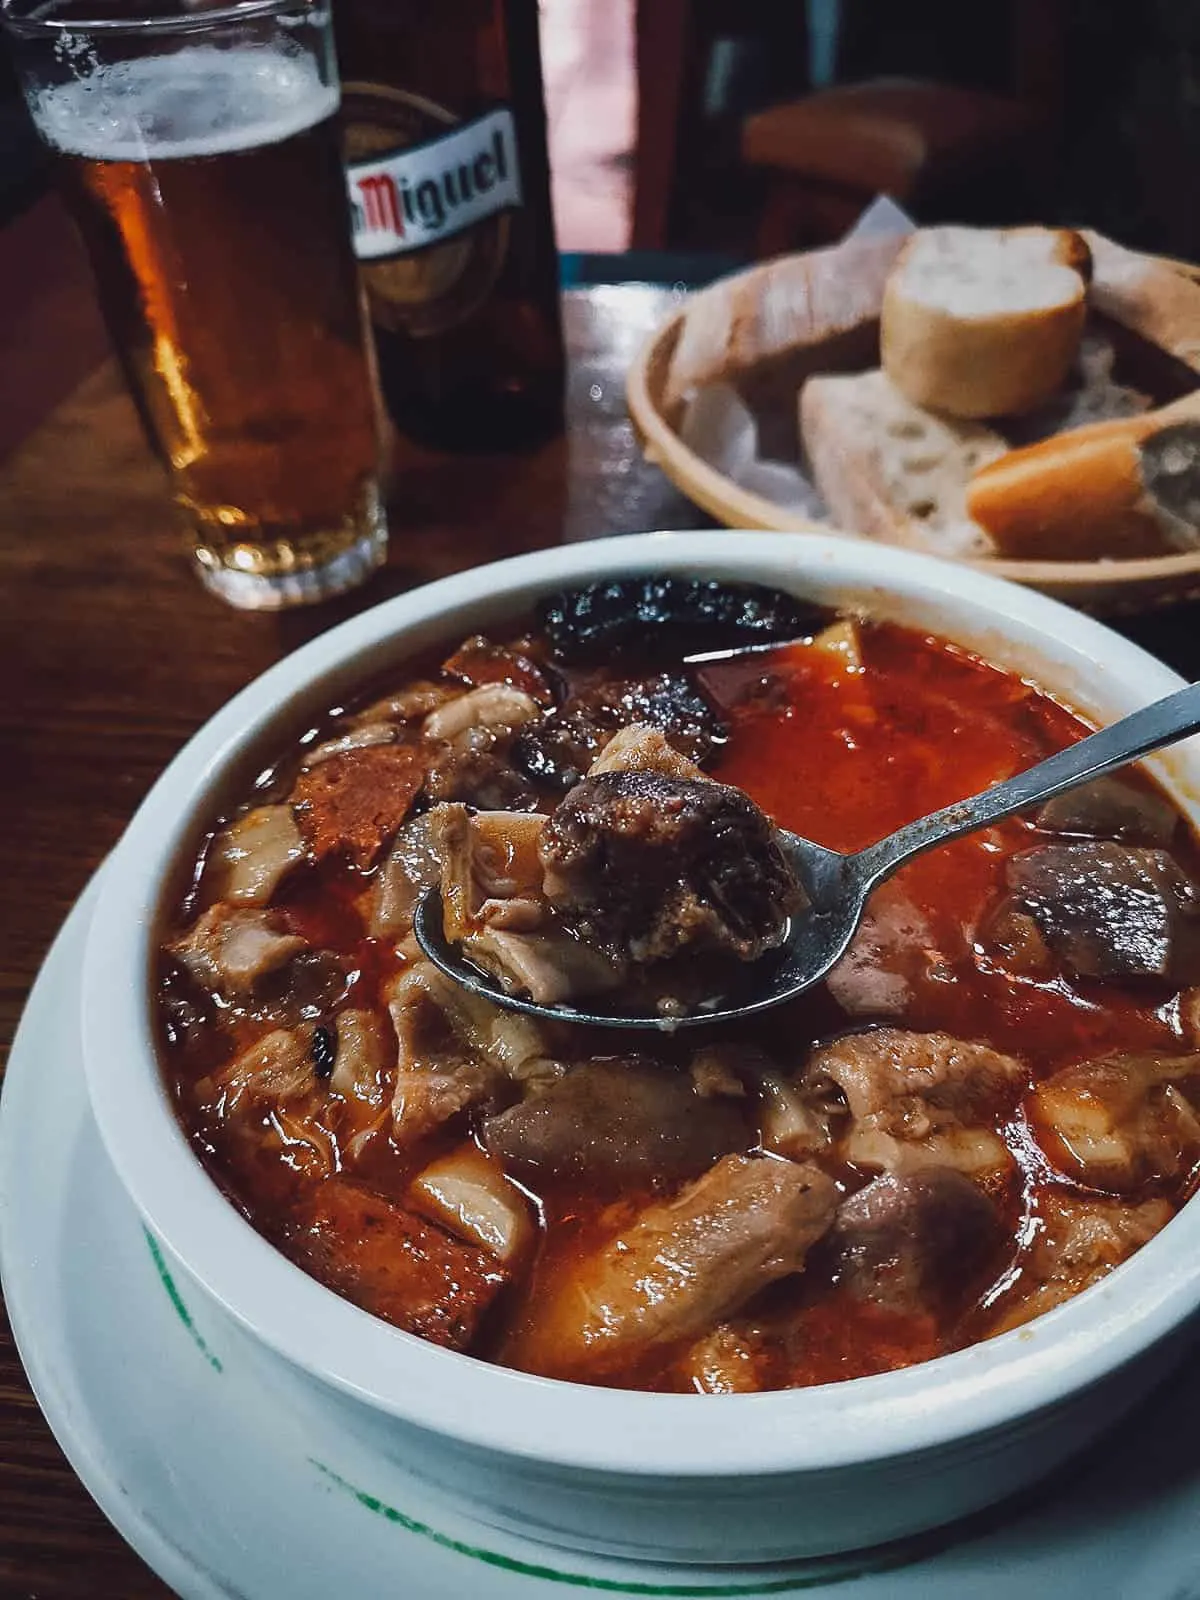 Callos, one of the most famous examples of traditional food in Spain